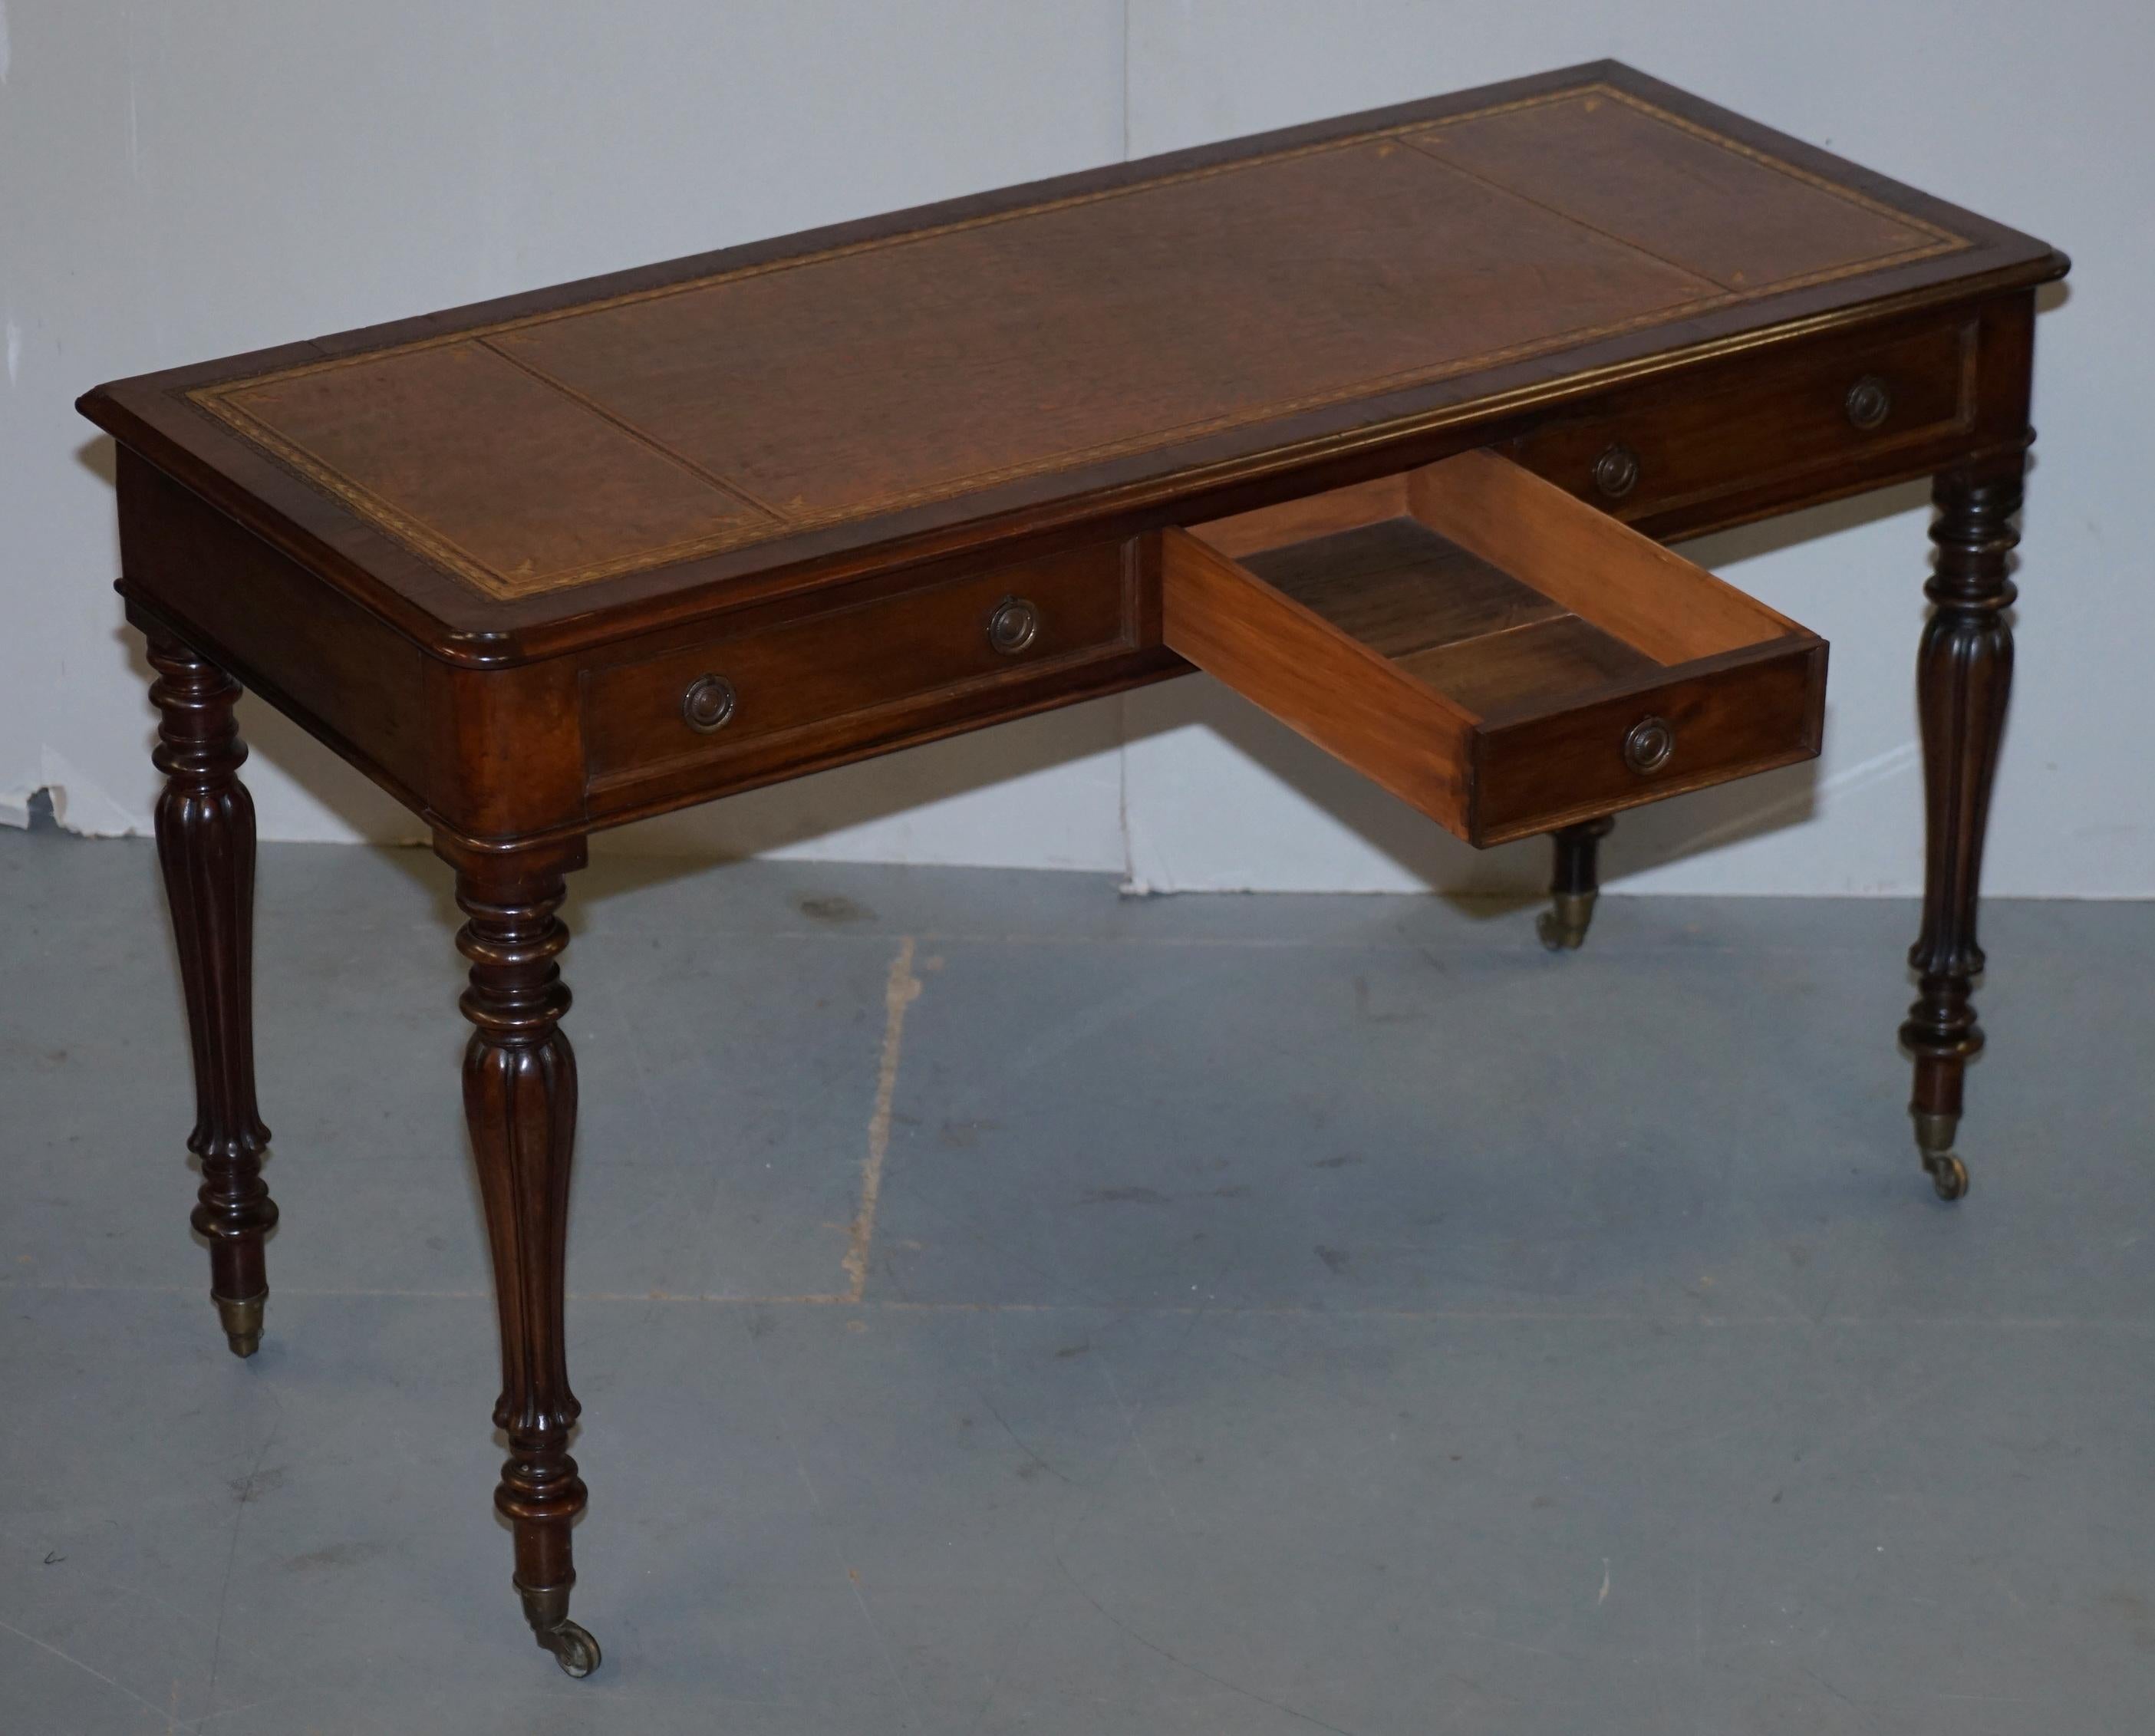 Stunning Victorian Library Writing Table or Desk Brown Leather Top Gillows Legs 12